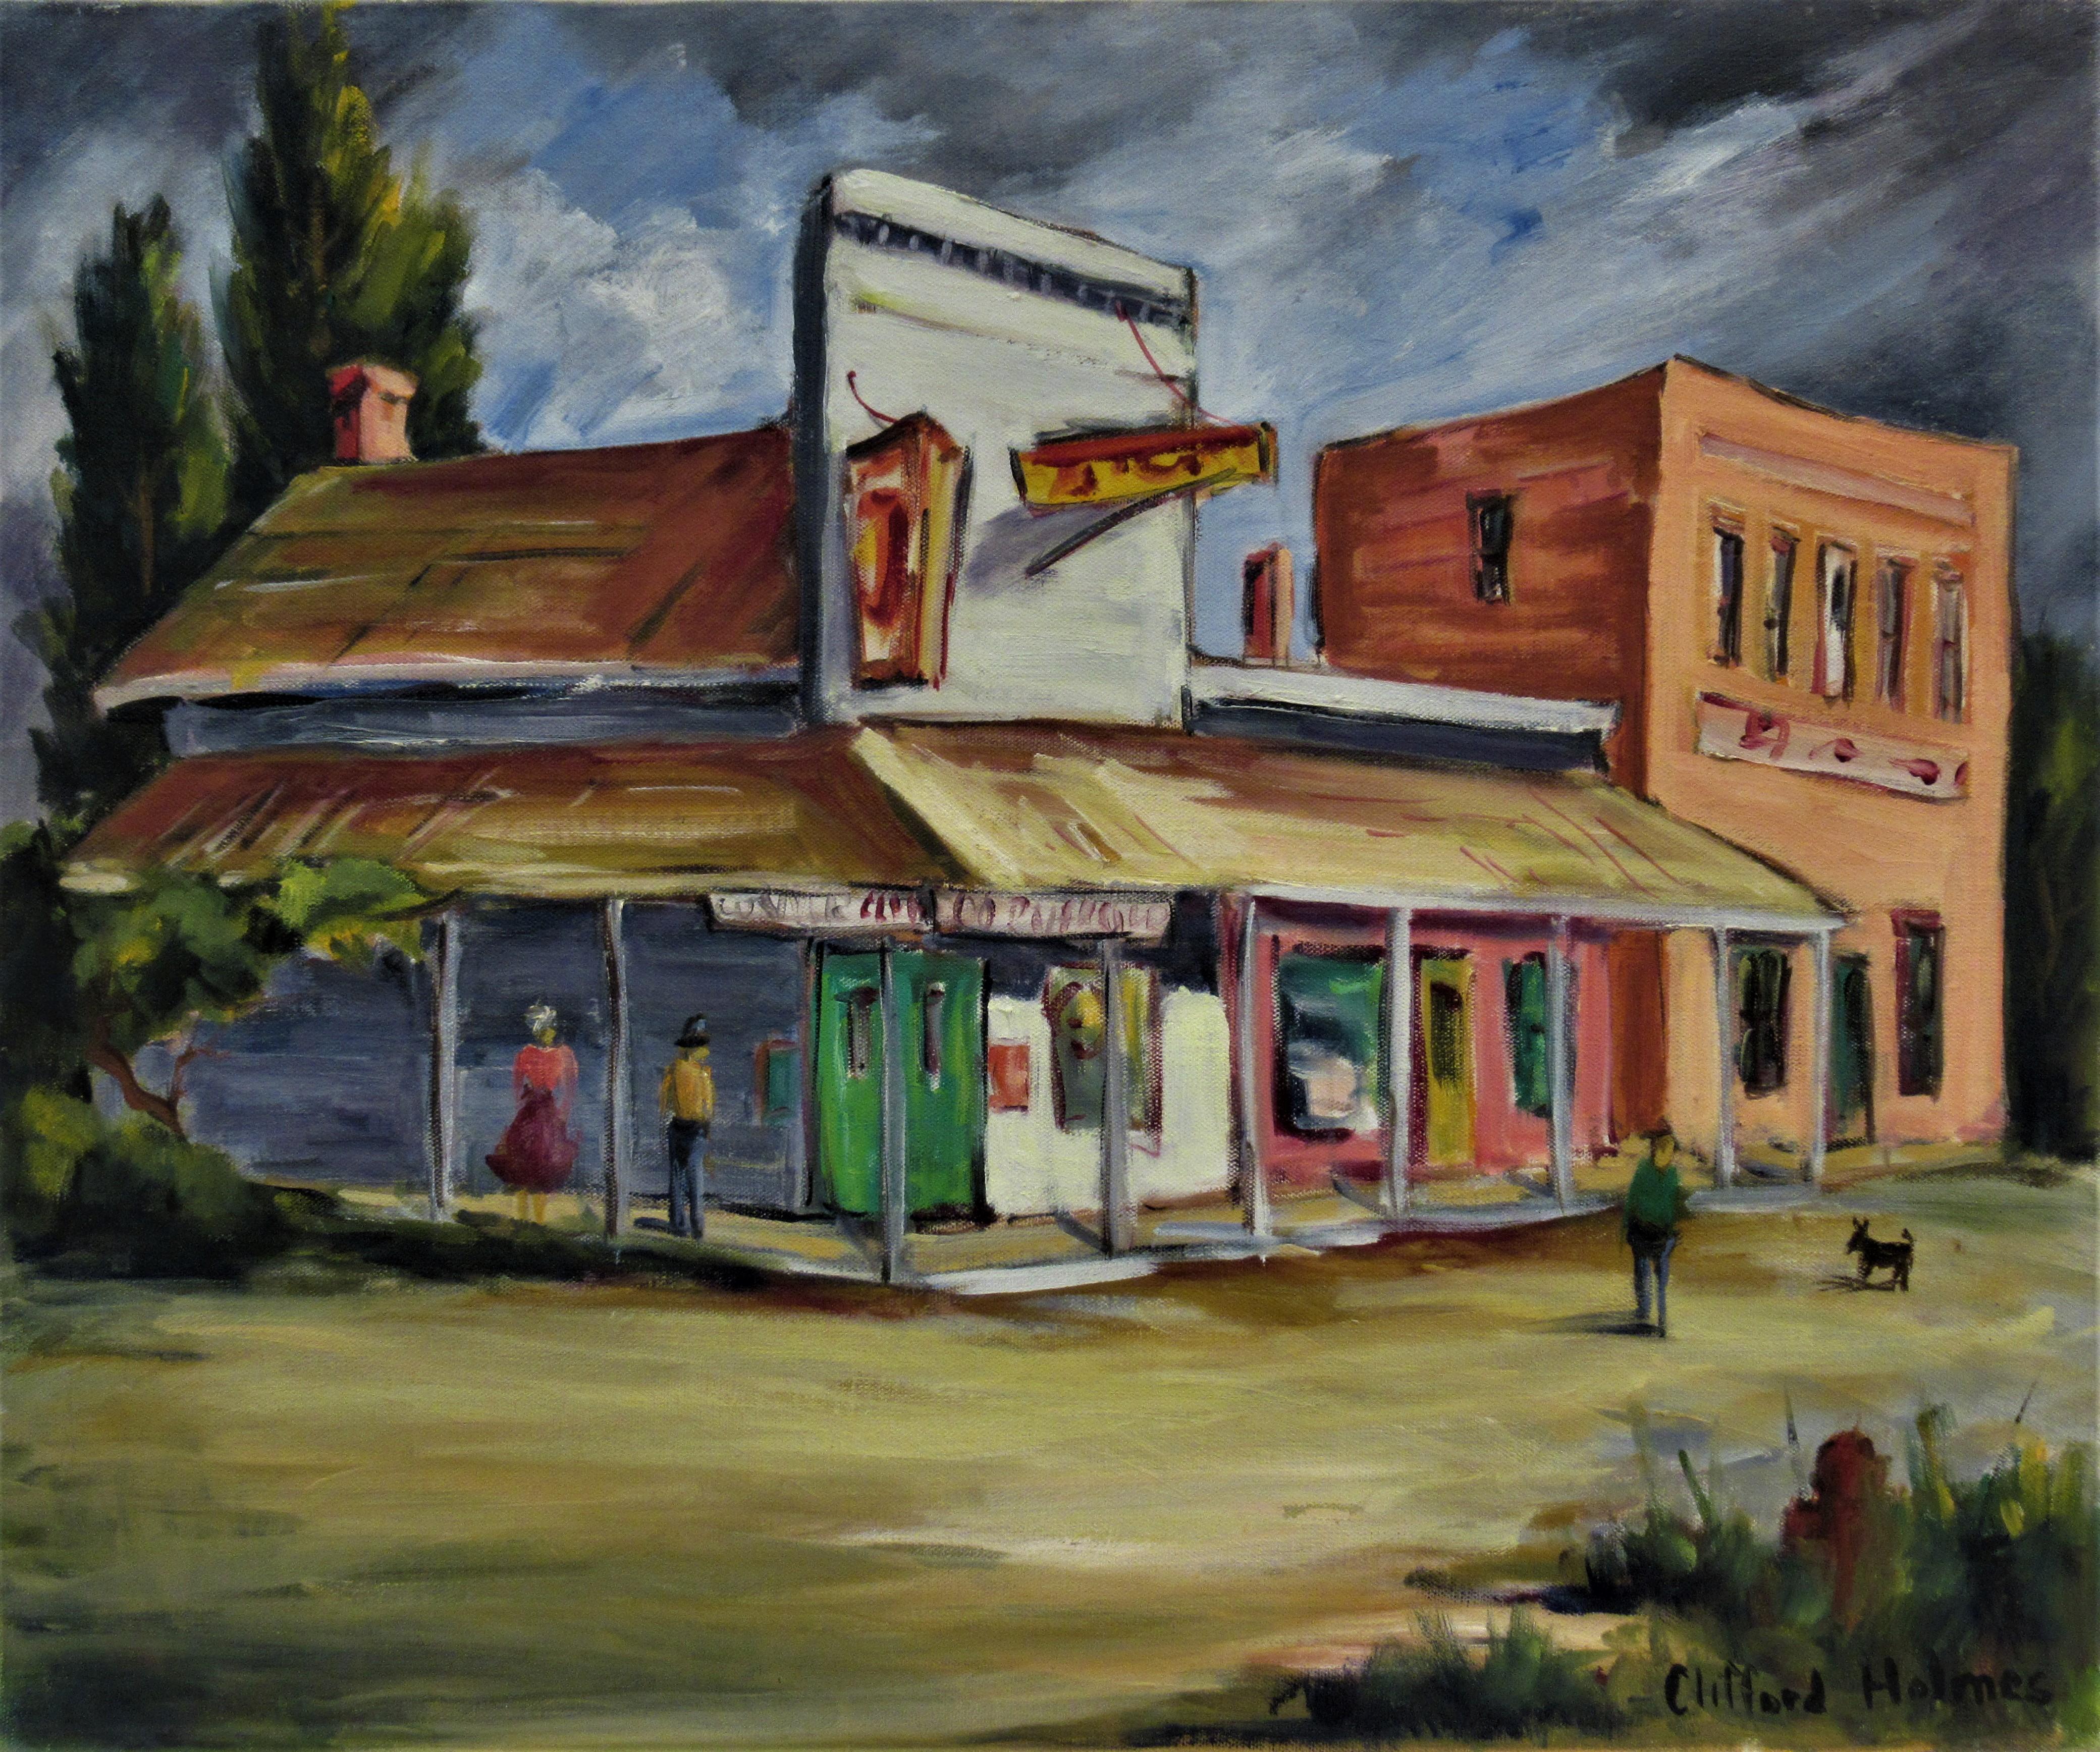 Clifford Holmes Landscape Painting - The Corner Store, Near Mendocino